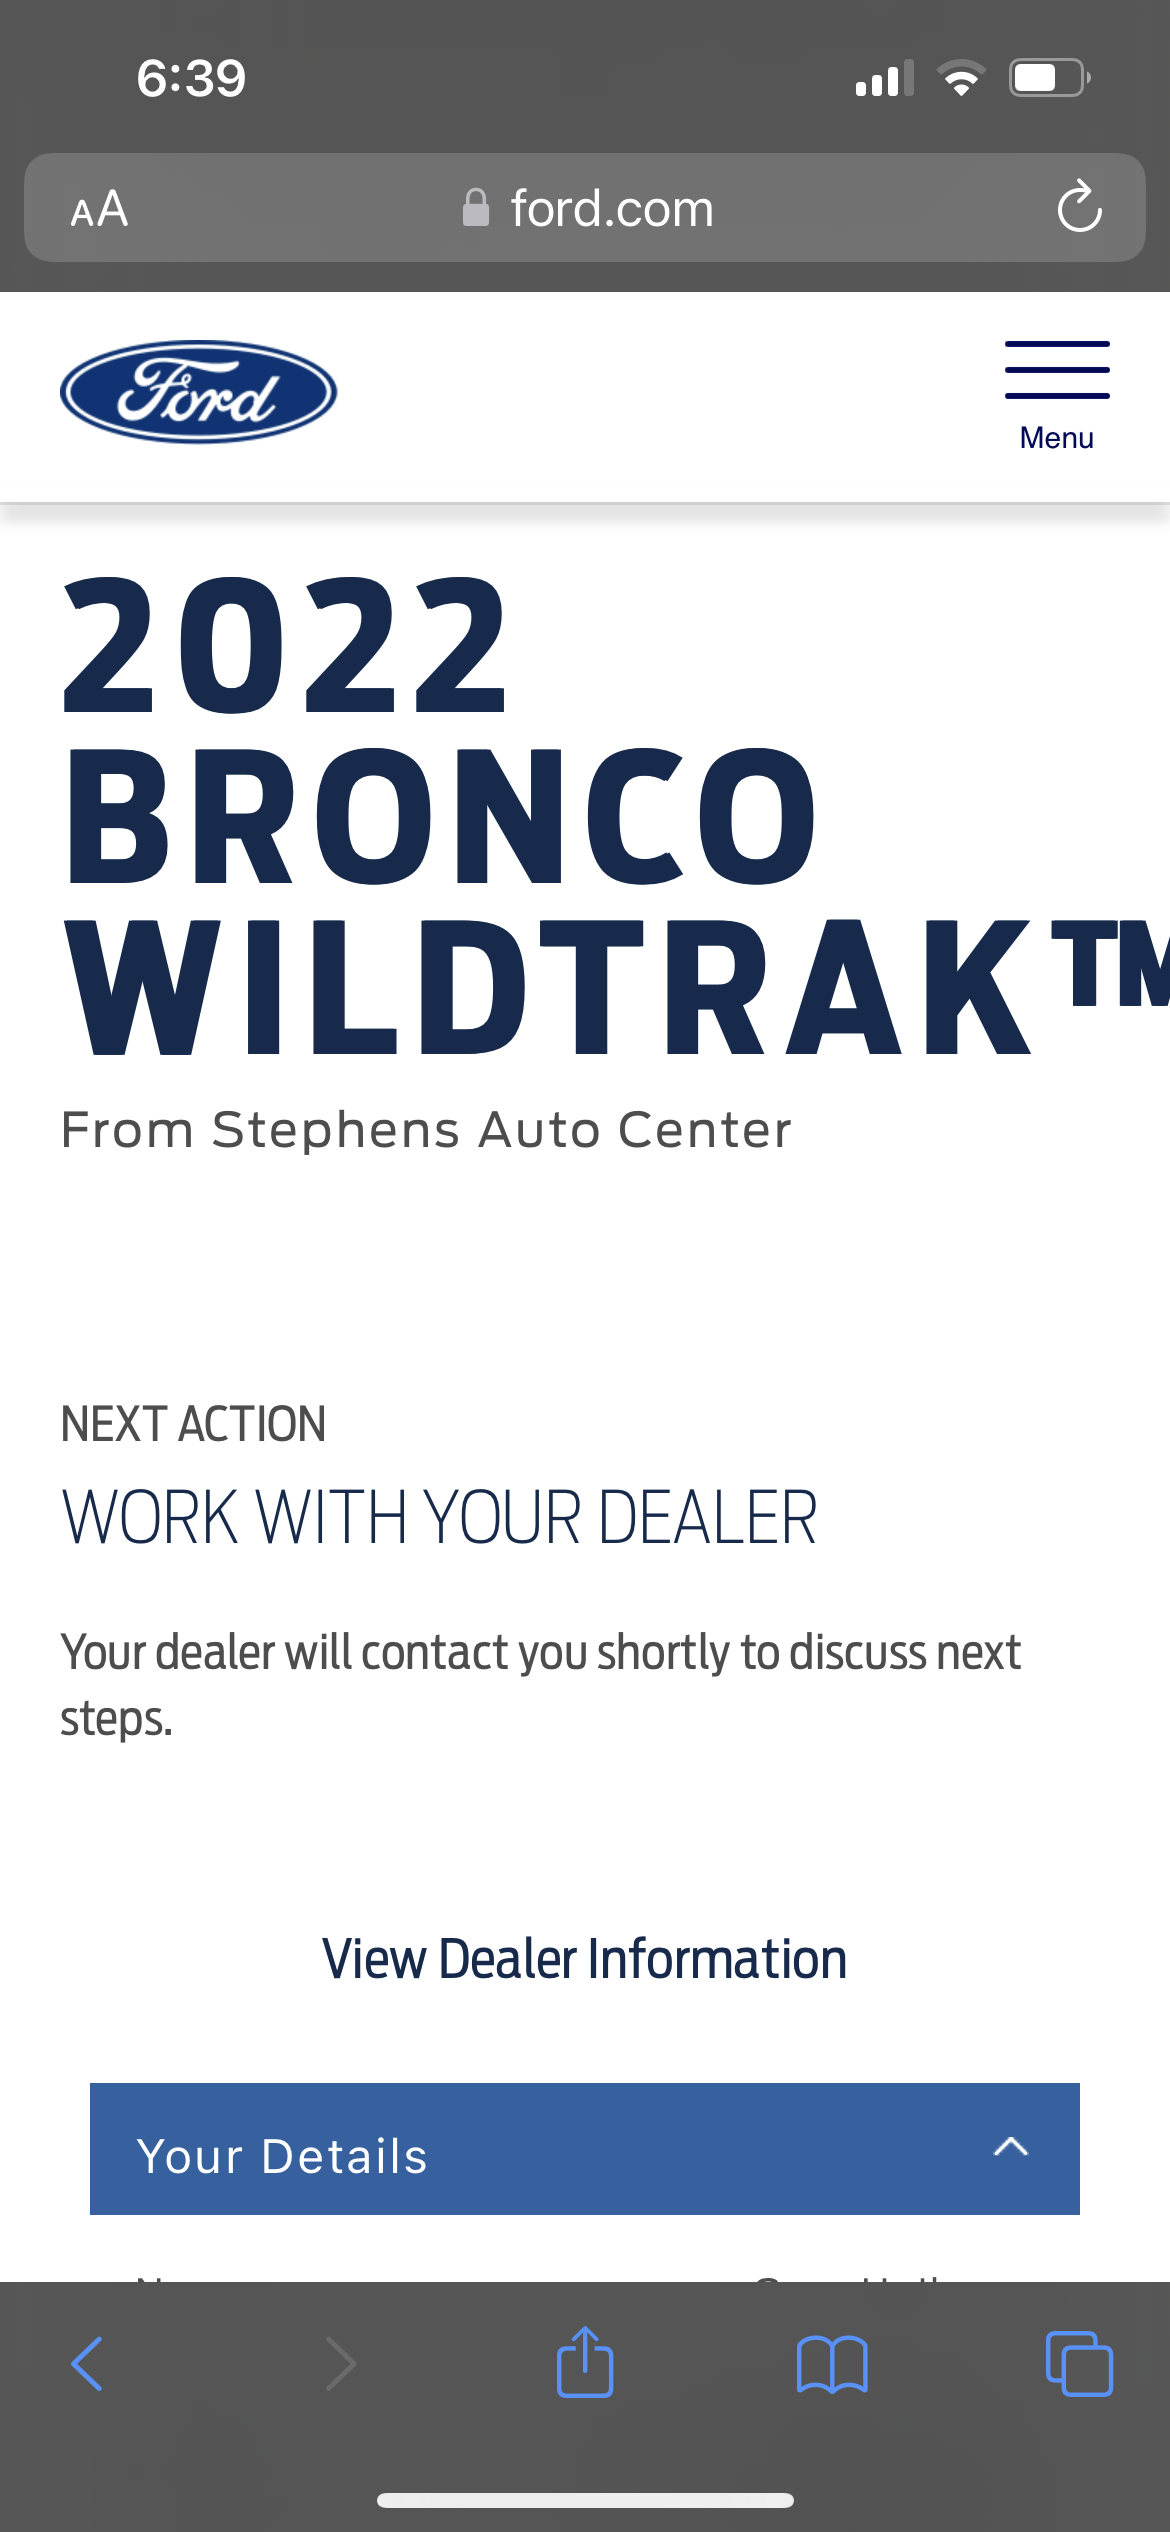 Ford Bronco The Plan & Offer - Stephens Auto Center's Mid Atlantic Bronco Connection 45A0A5C5-A11F-4381-965D-405921932D27